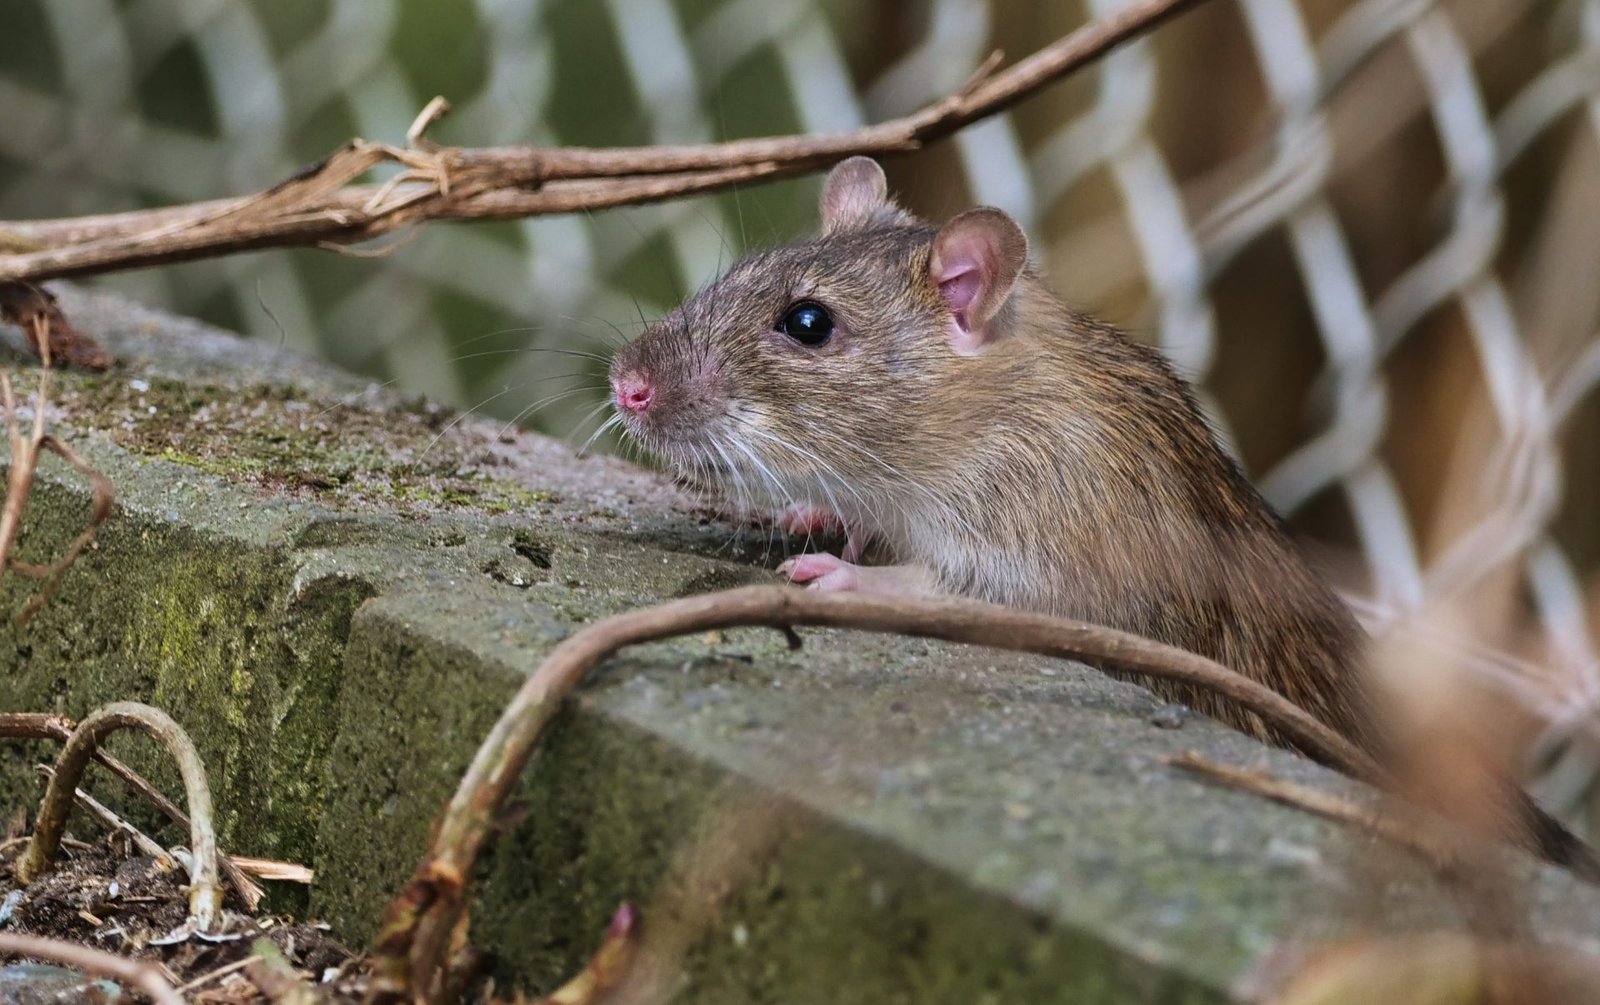 Record: Chicago Ranks #1 For The “Rattiest City,” New York Comes In At #2